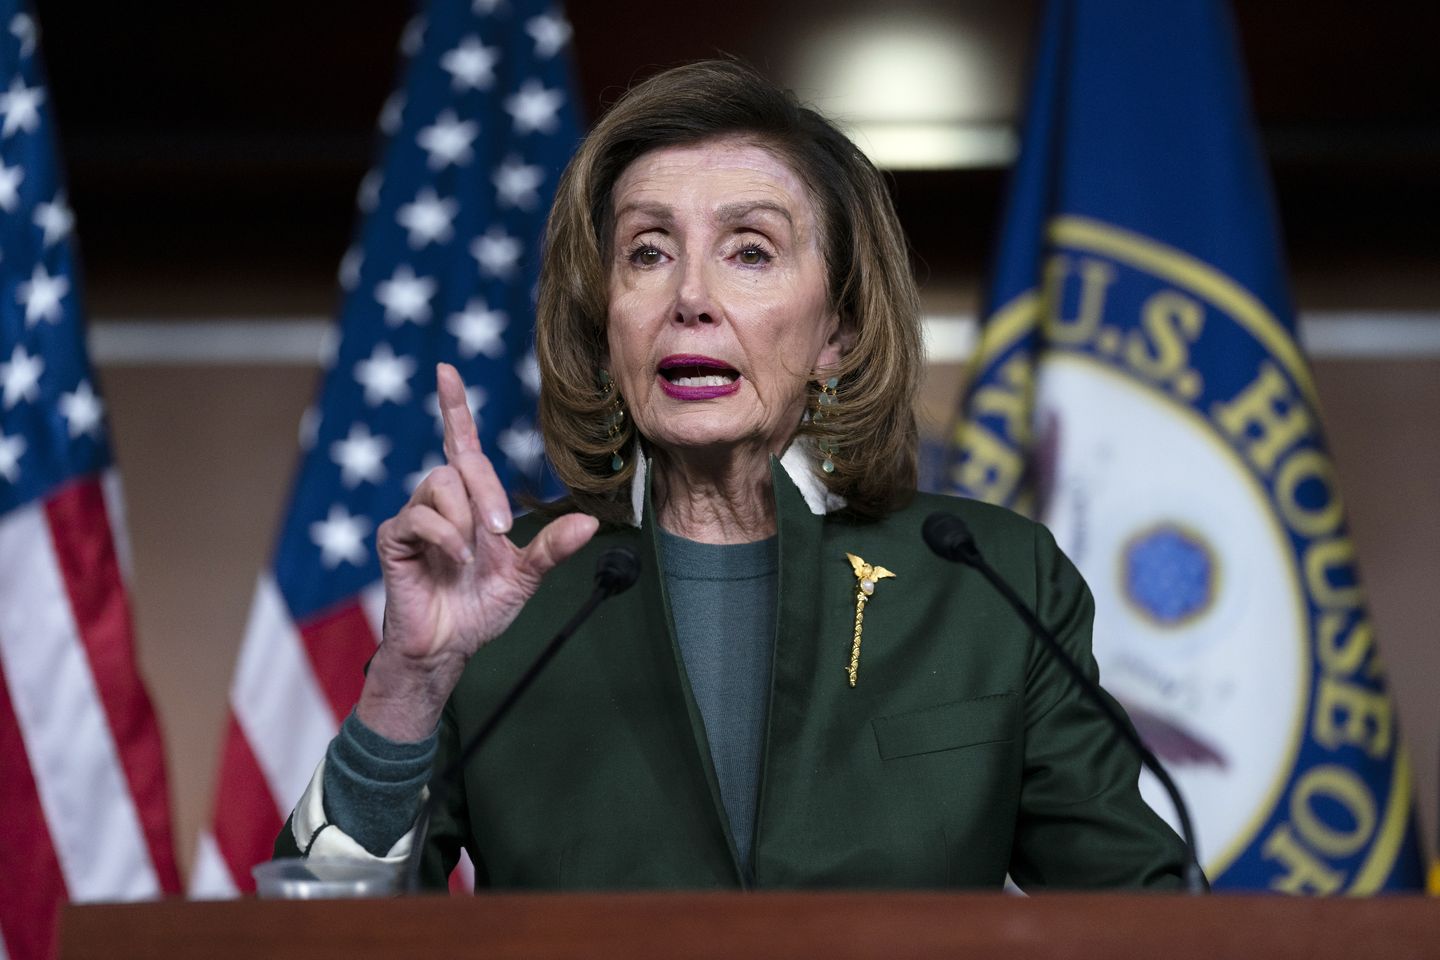 GOP presses Pelosi to reopen House to the public, end COVID-19 rules that keep out citizens